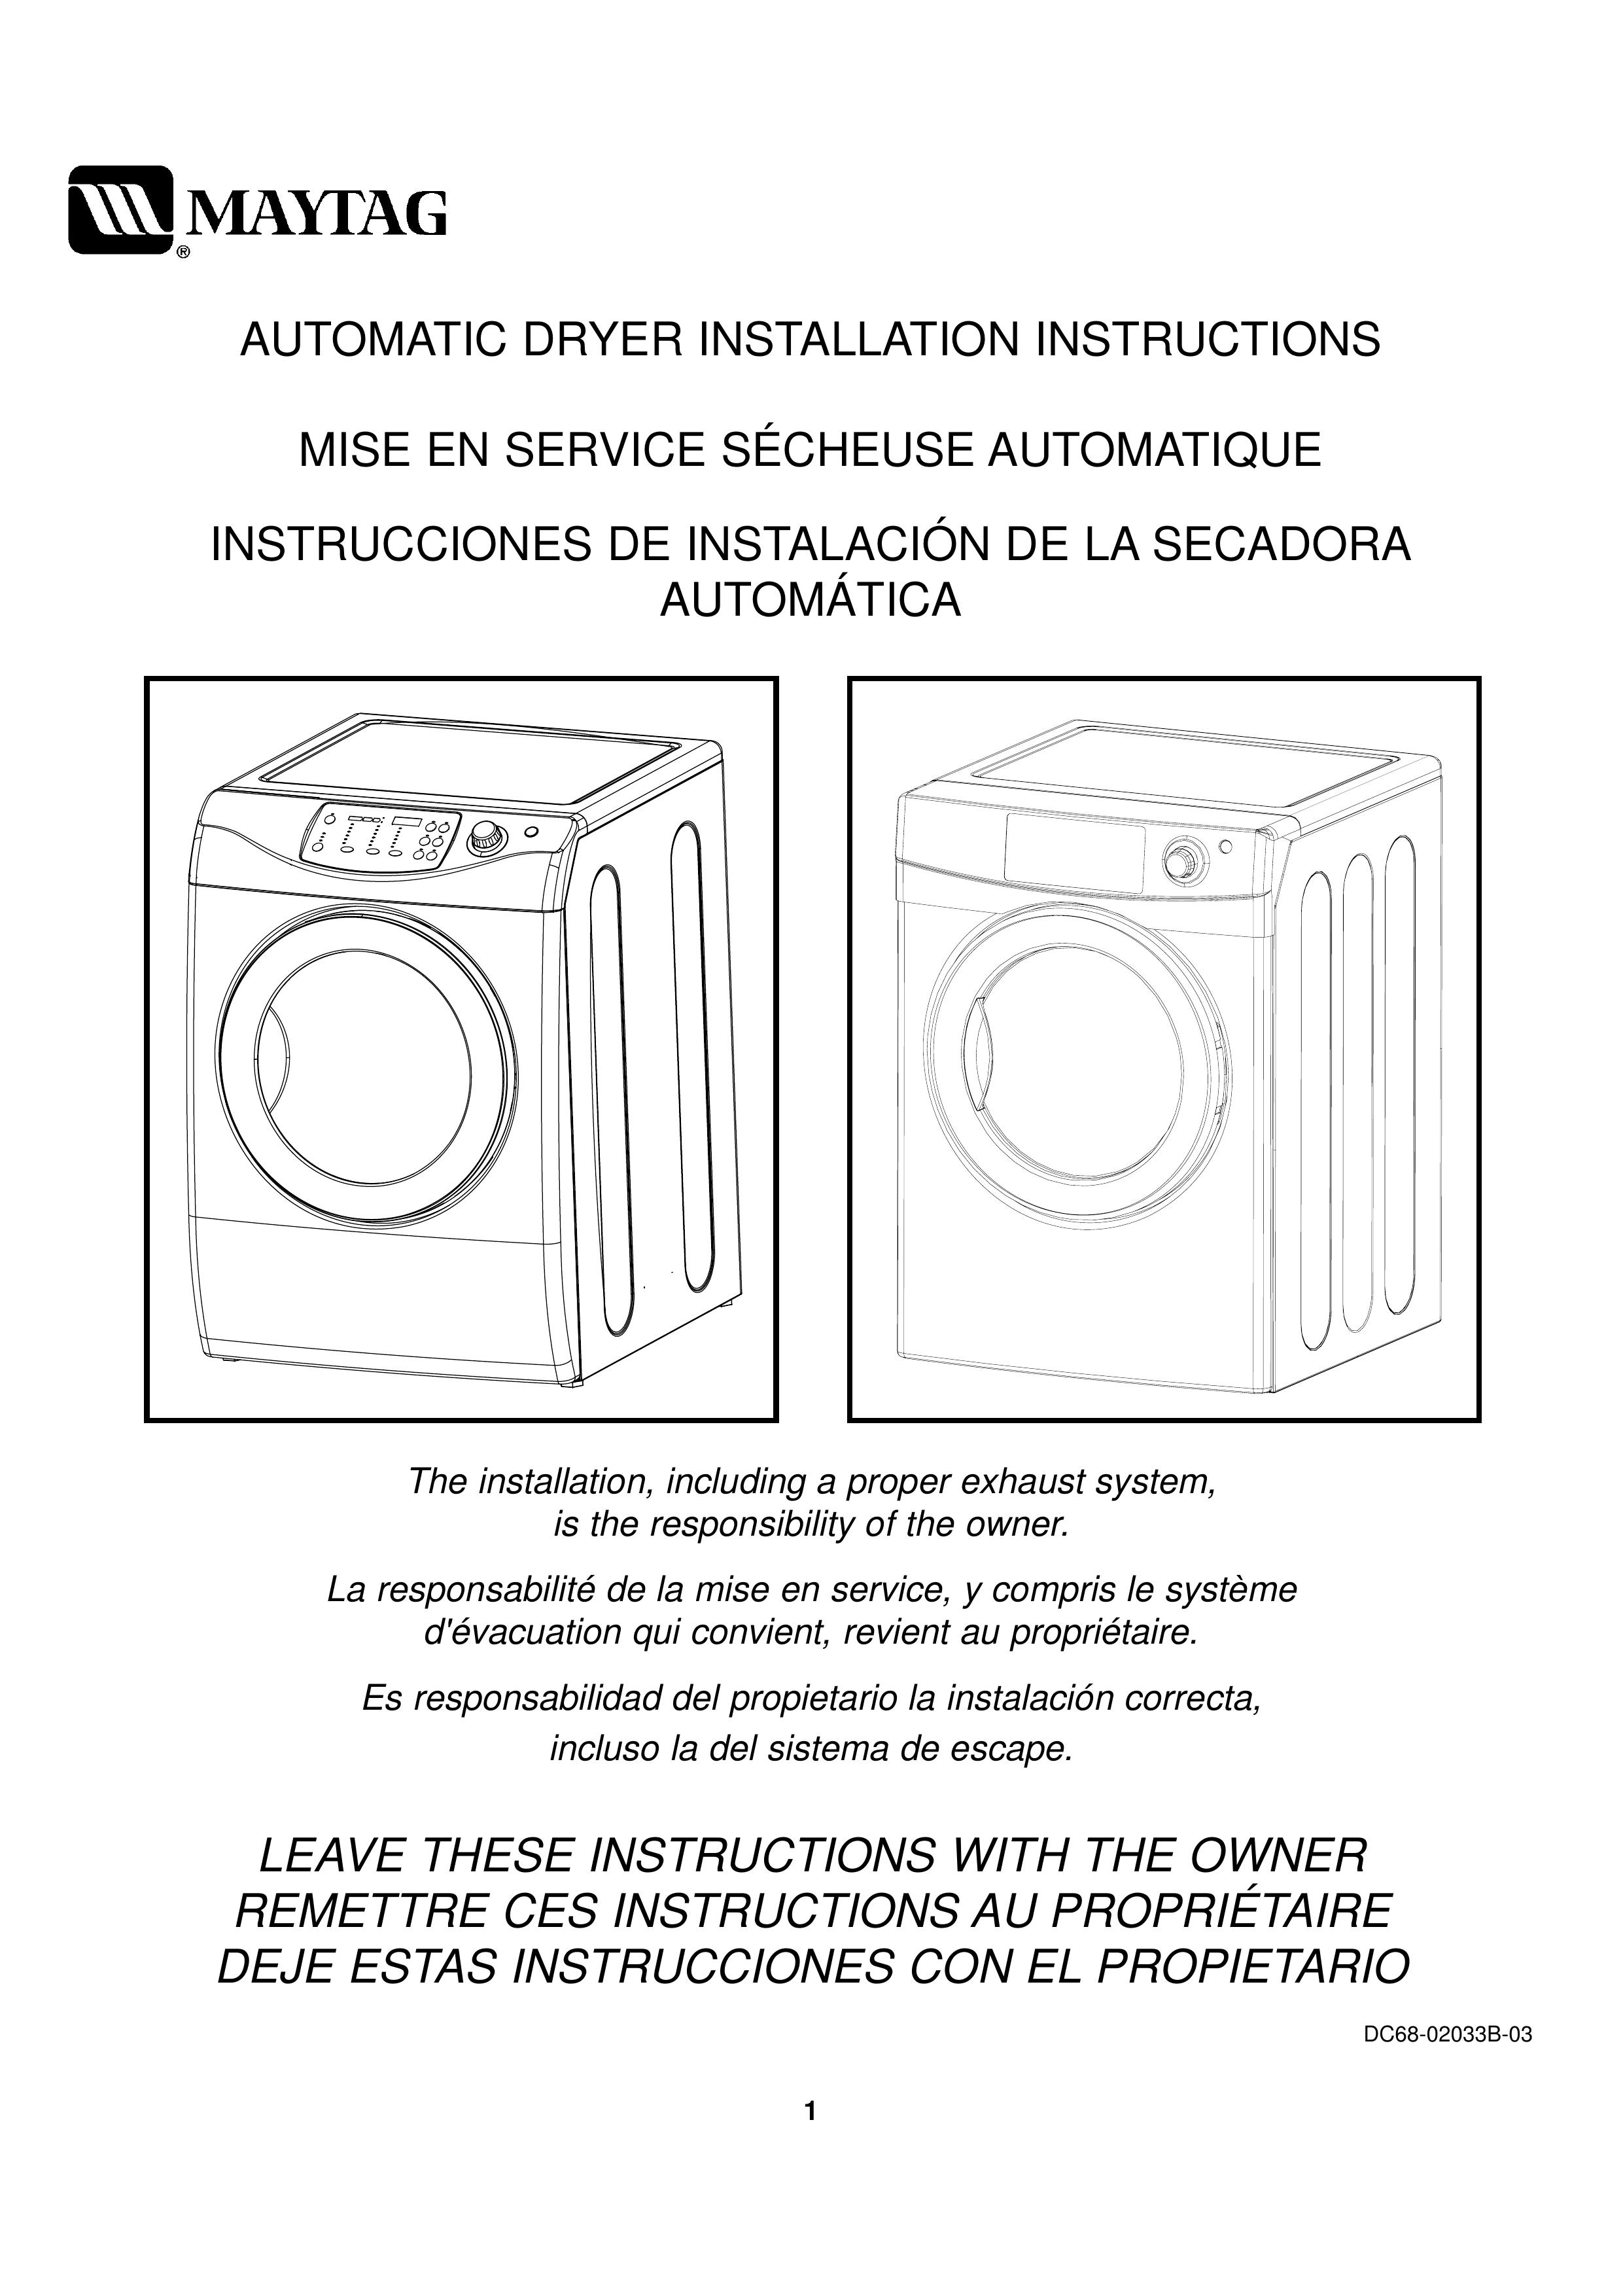 Maytag DC68-02033B-03 Clothes Dryer User Manual